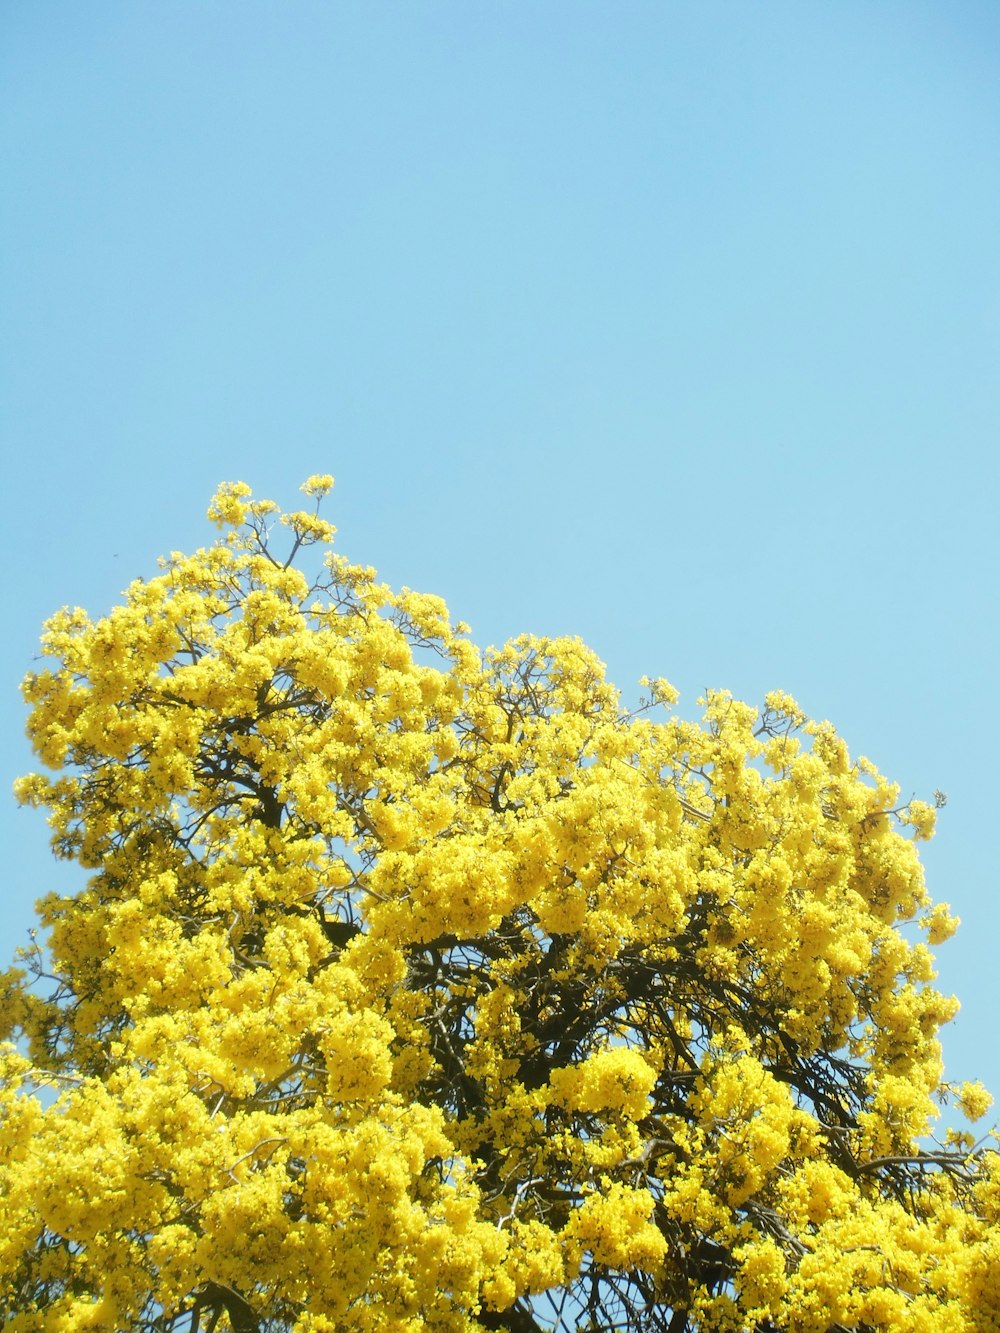 a tree with yellow flowers in the foreground and a blue sky in the background